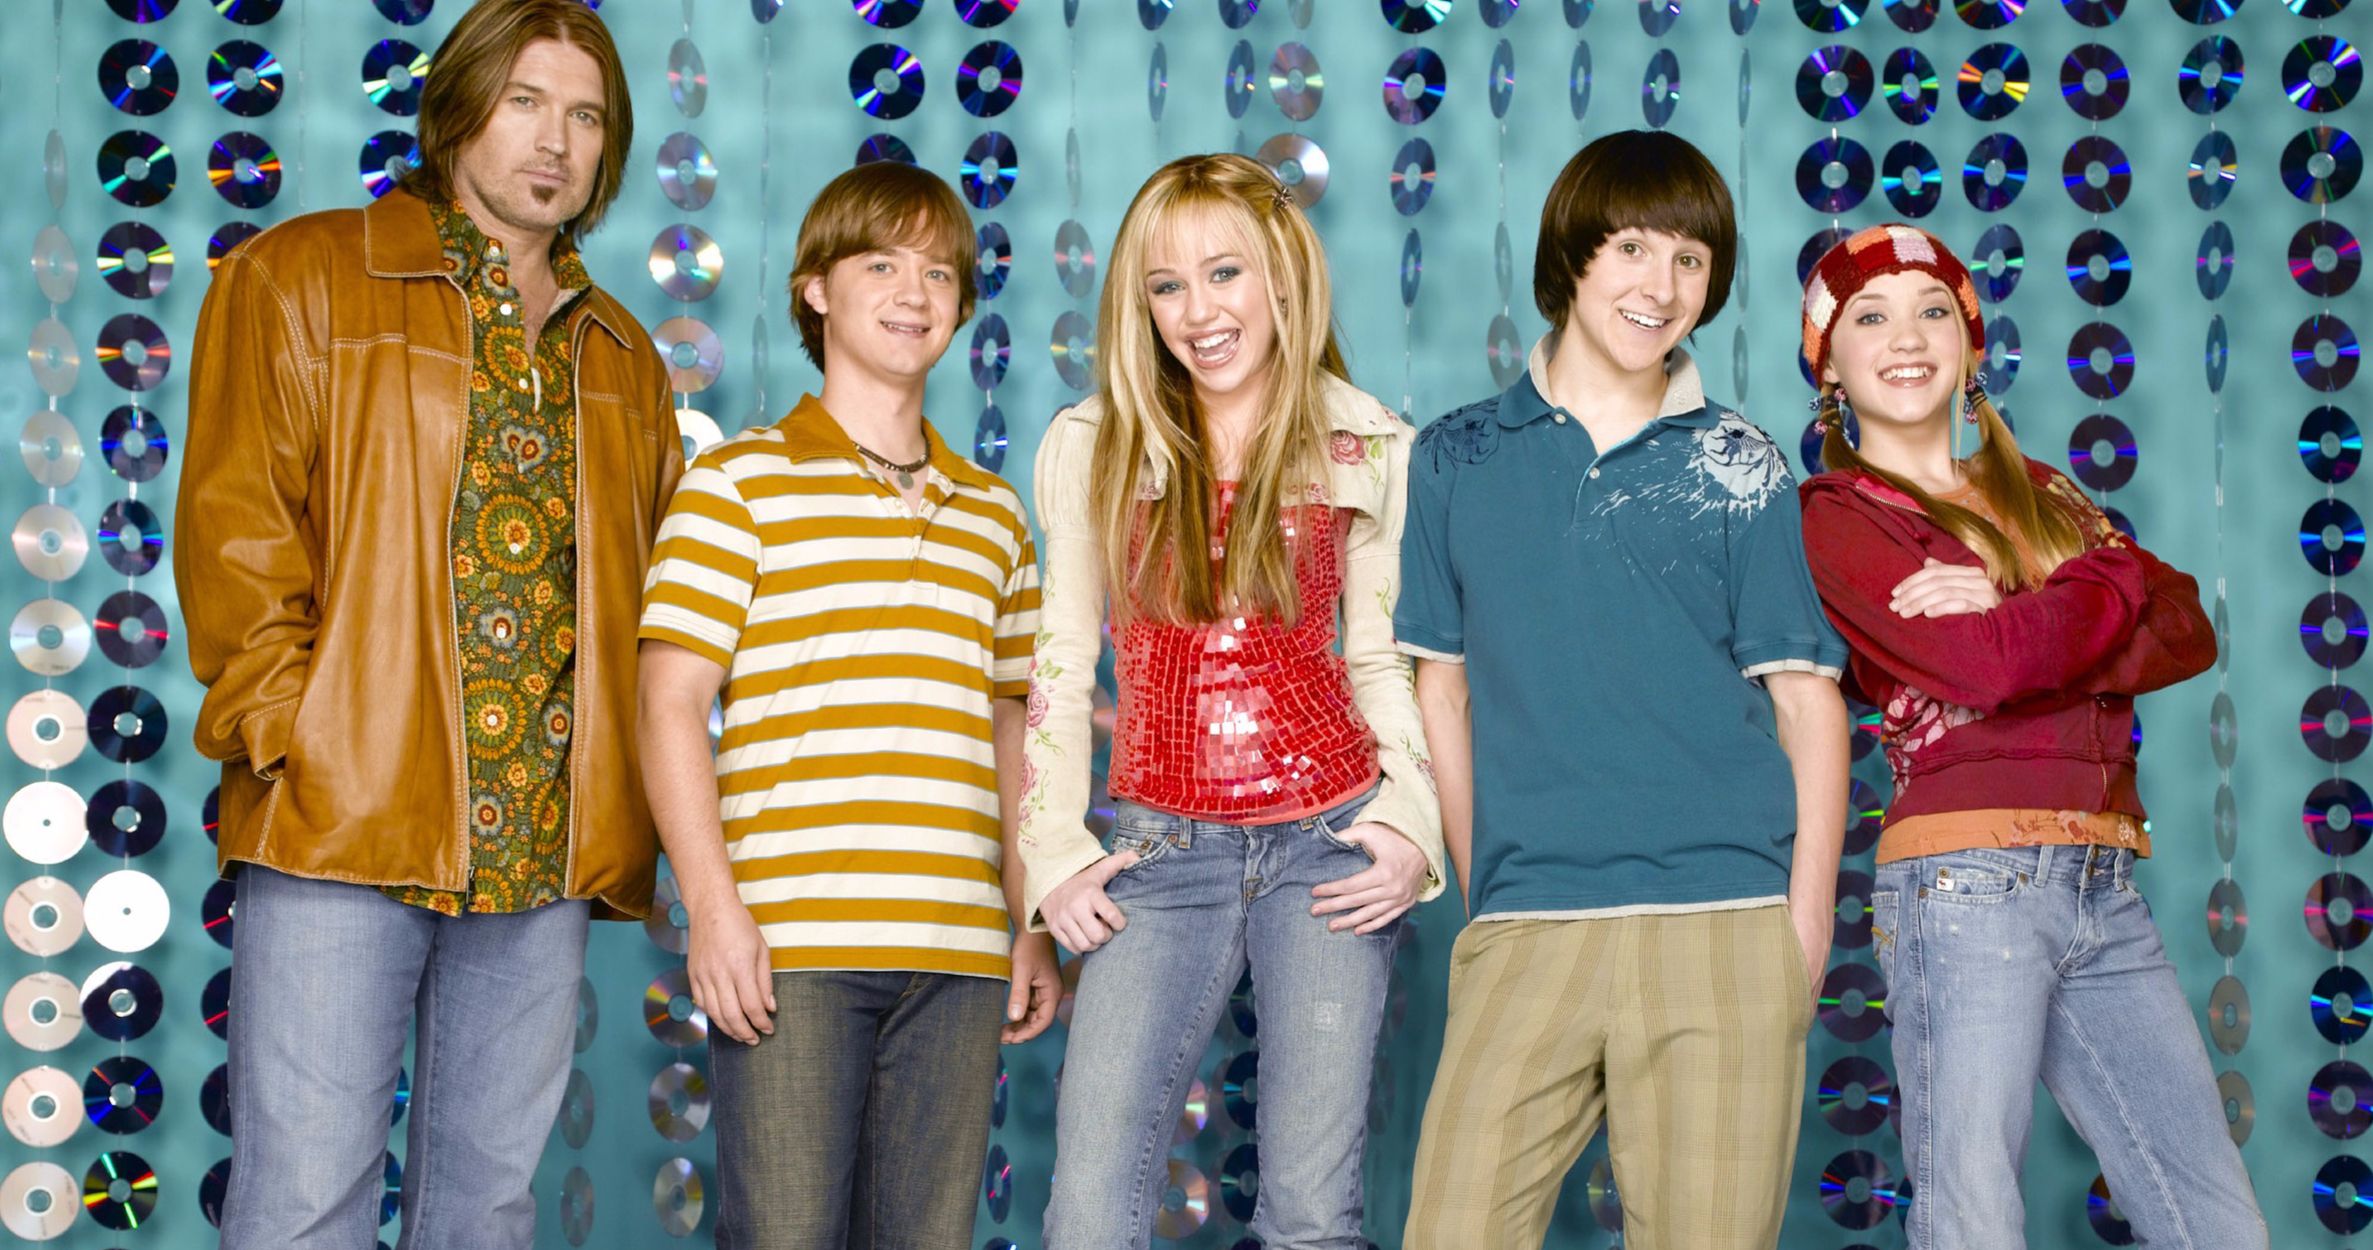 Hannah Montana TV Prequel Is Coming, Billy Ray Cyrus Wants to Return